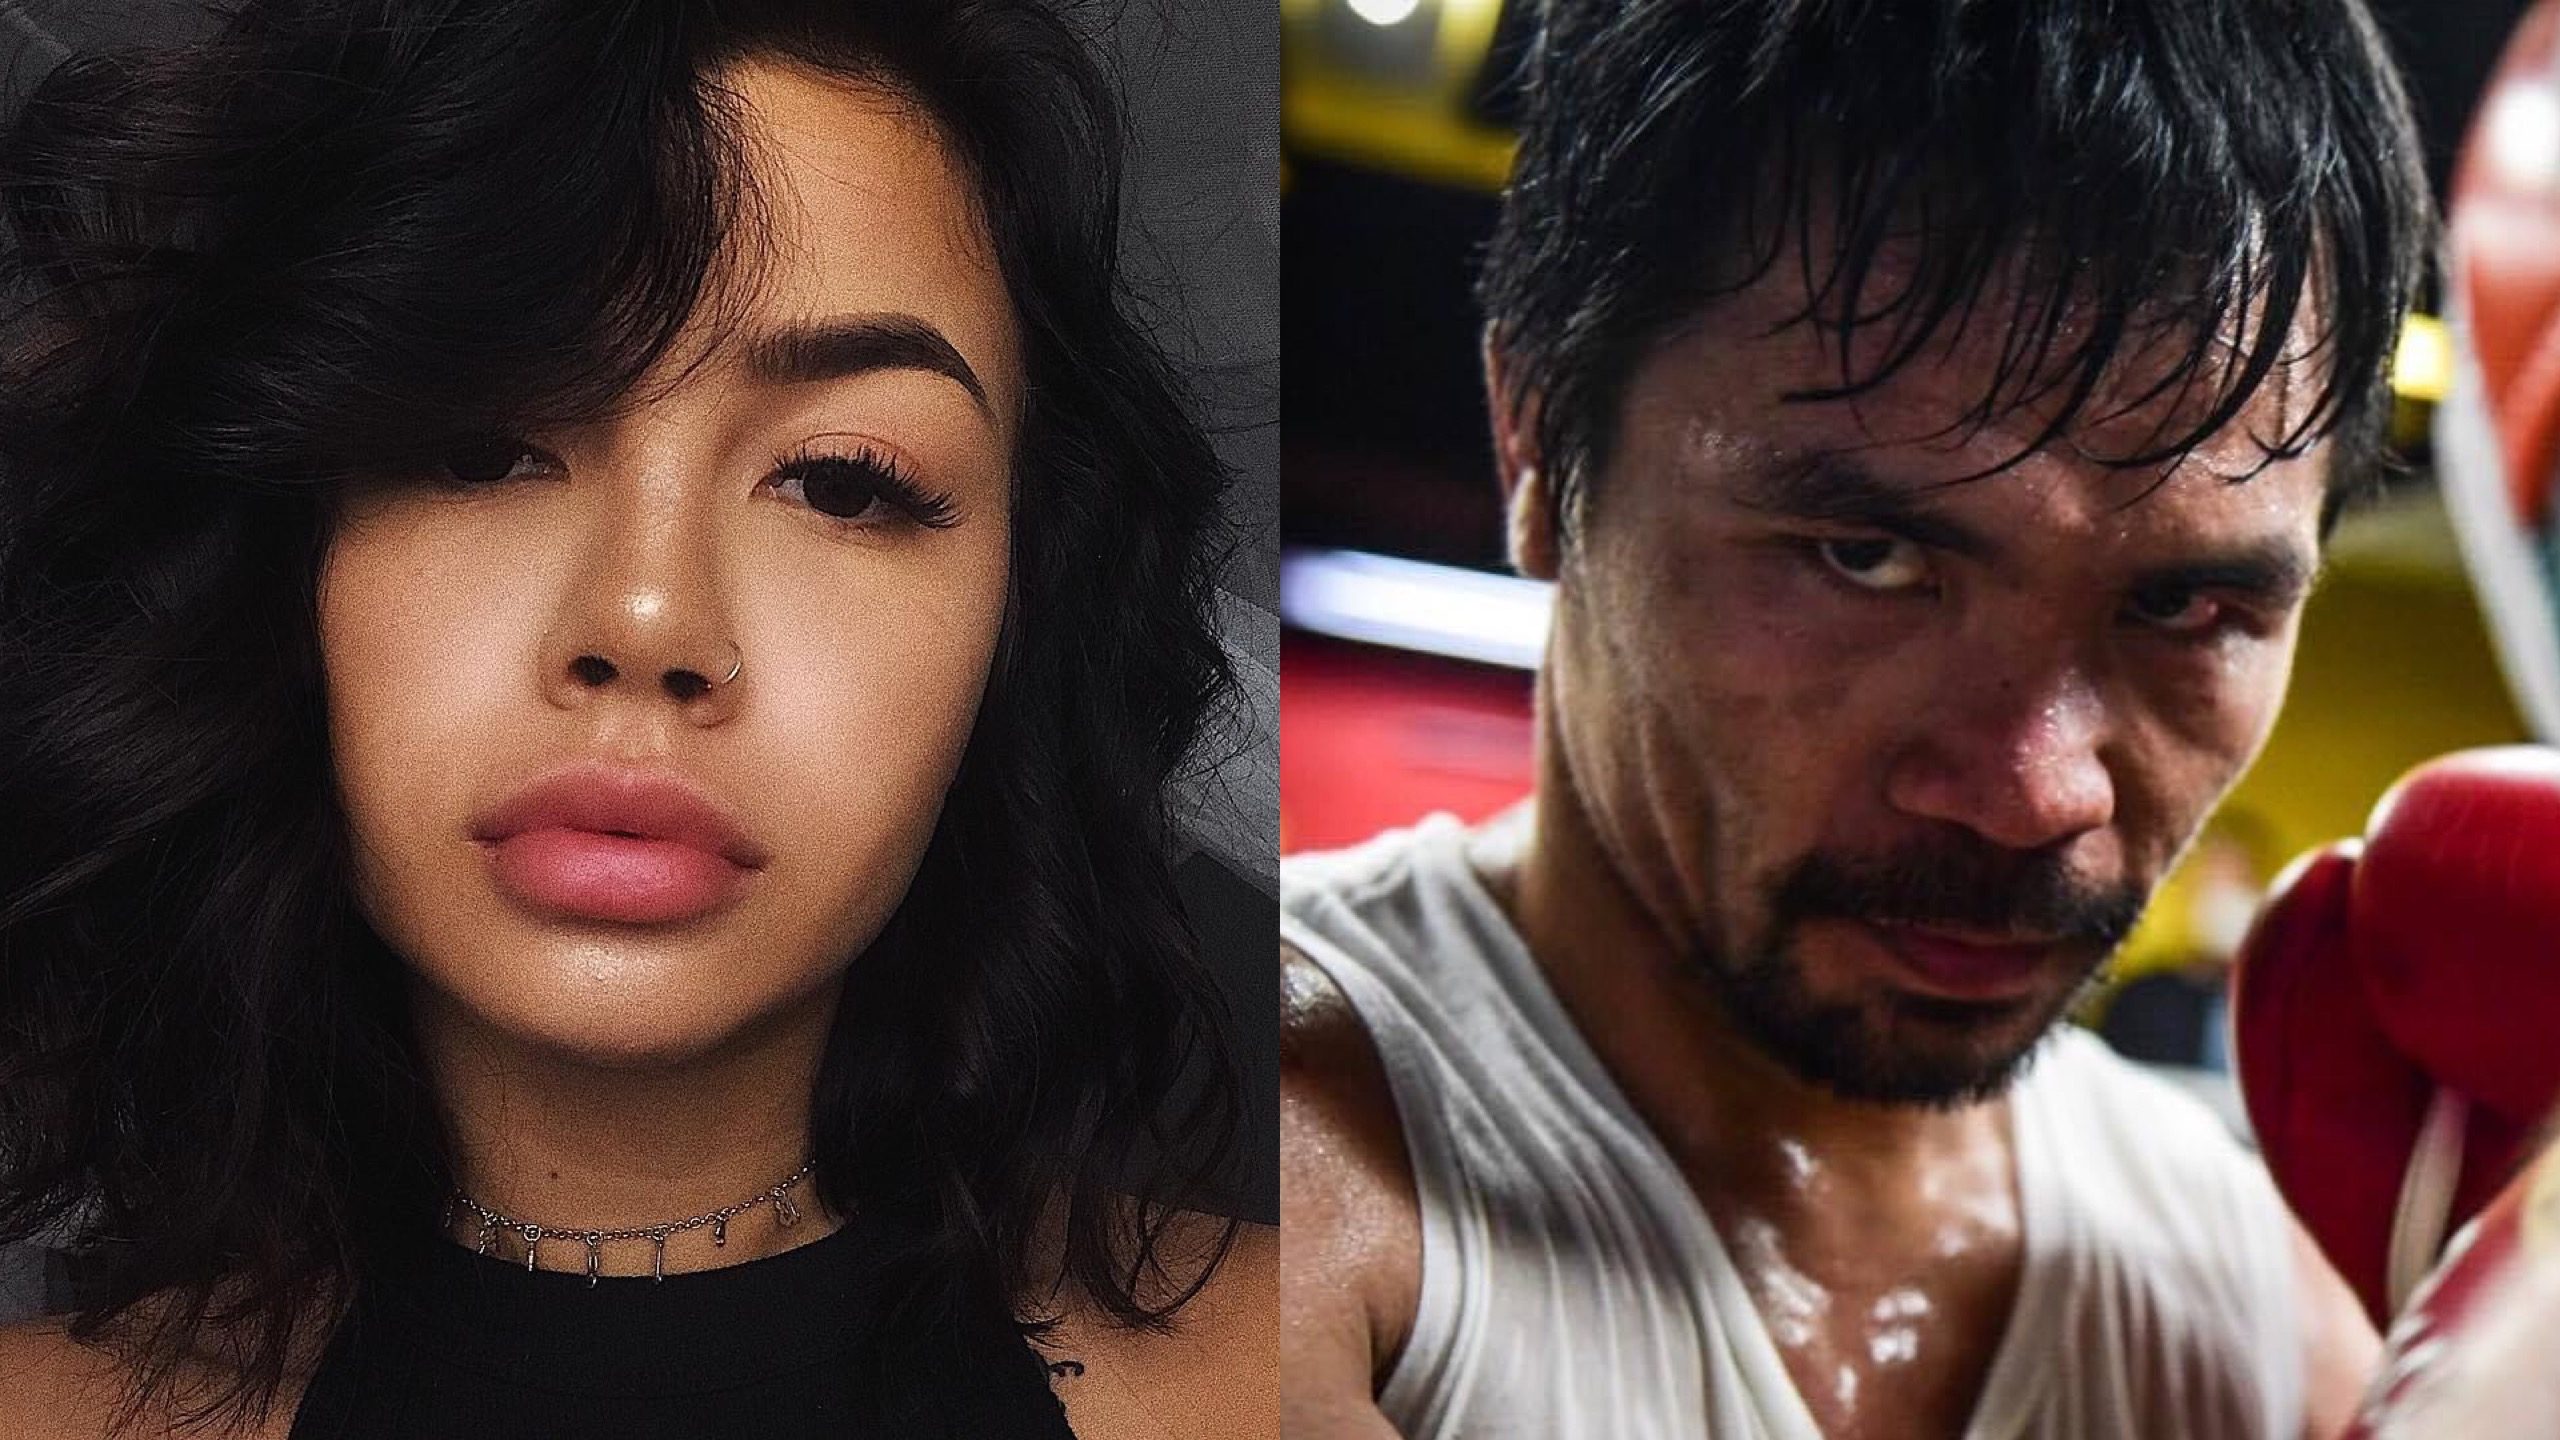 Model Arzaylea denies starting a conversation with Manny Pacquiao on Instagram